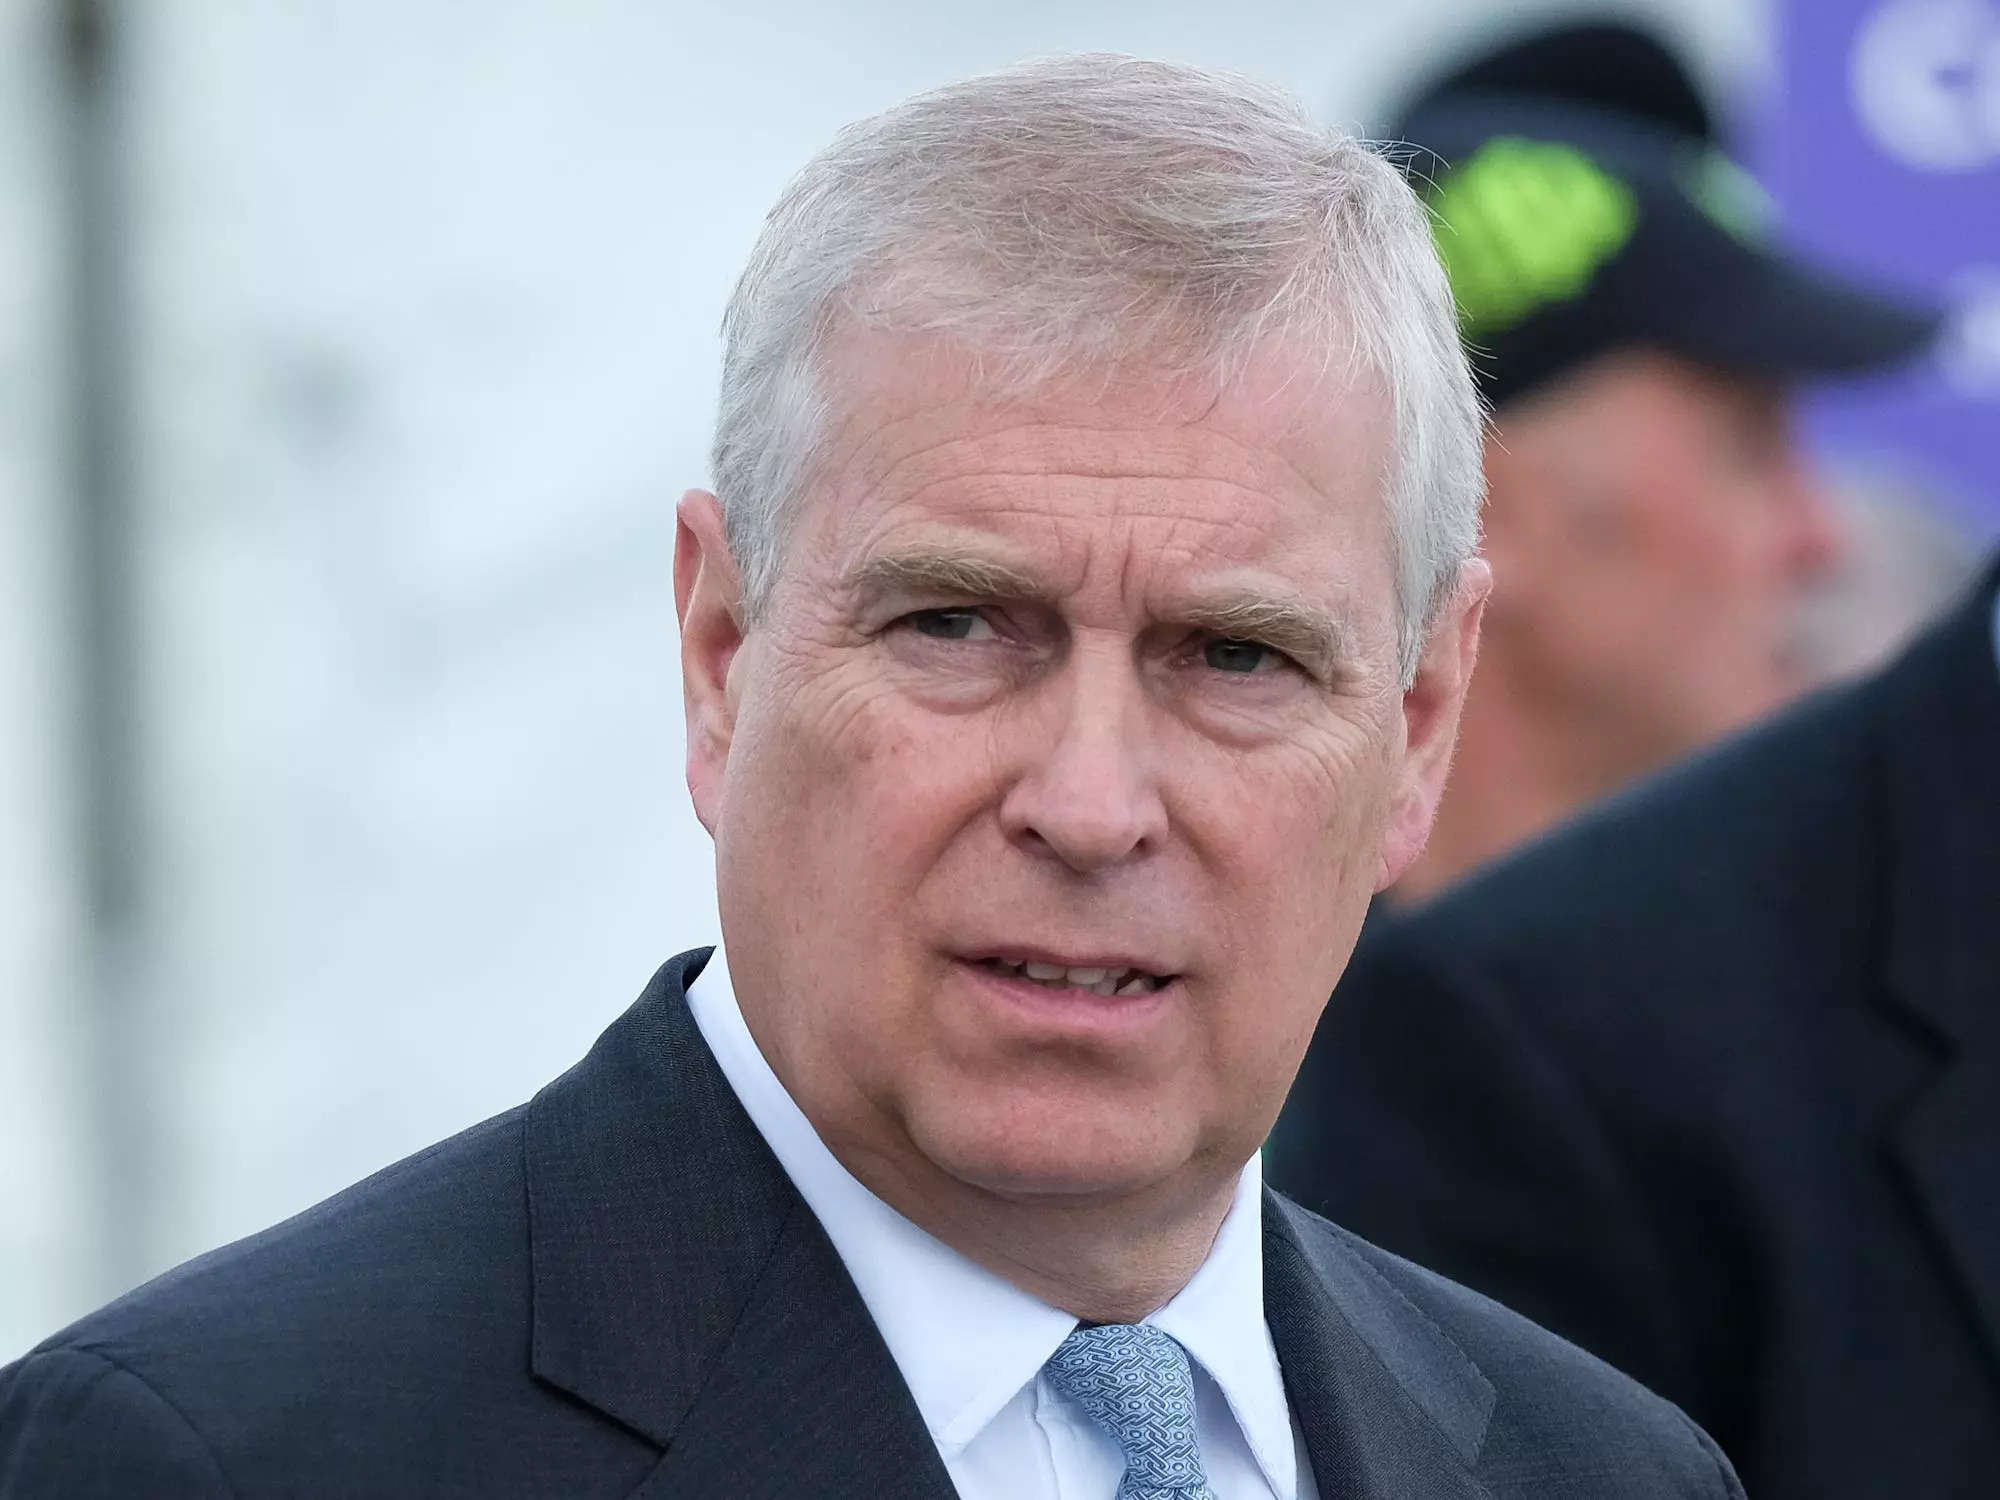 Prince Andrew used his stripped royal title in a now-deleted Instagram post shared on his ex-wife’s account